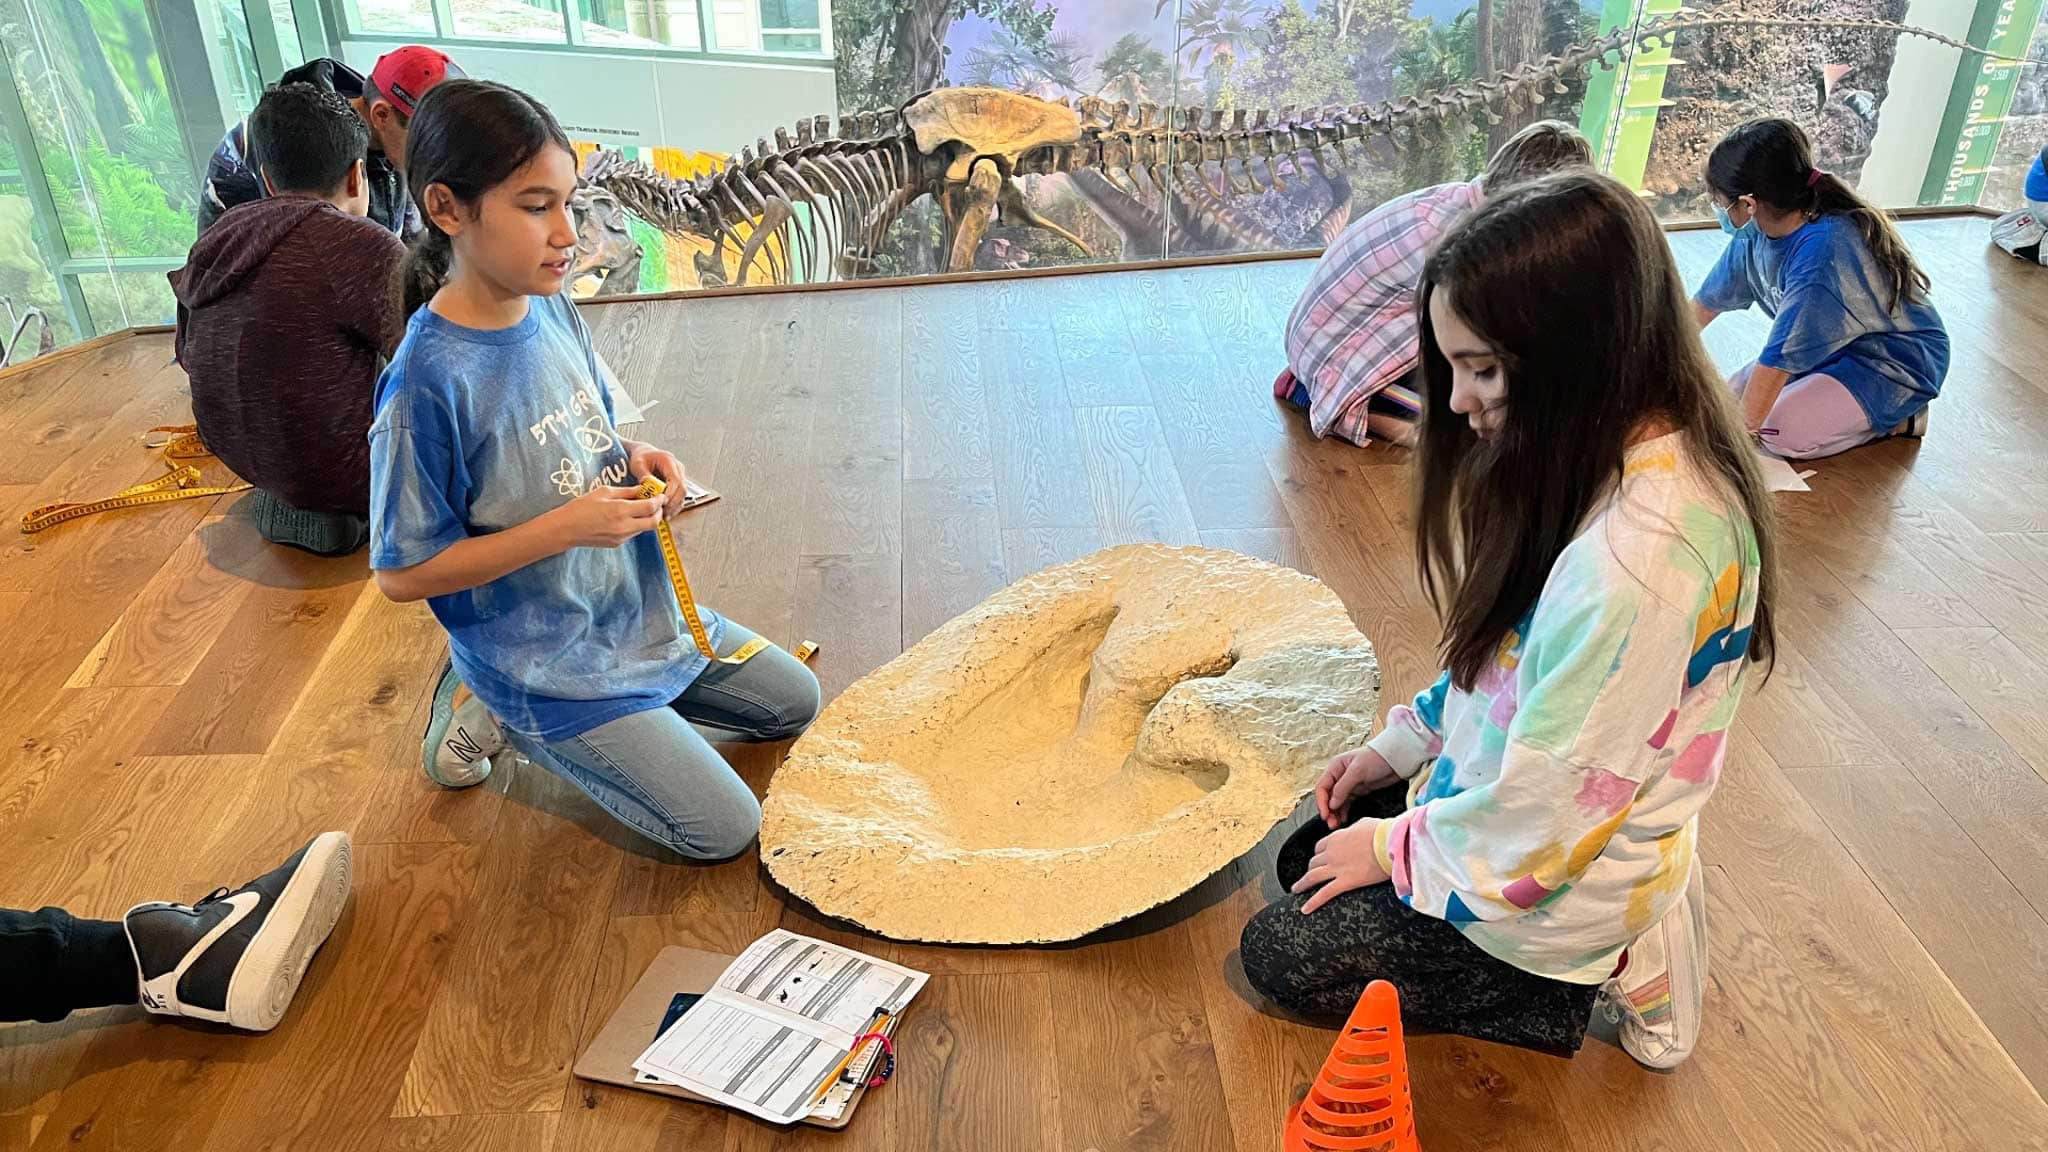 Two school-aged girls sitting on the floor next to a dinosaur track cast.